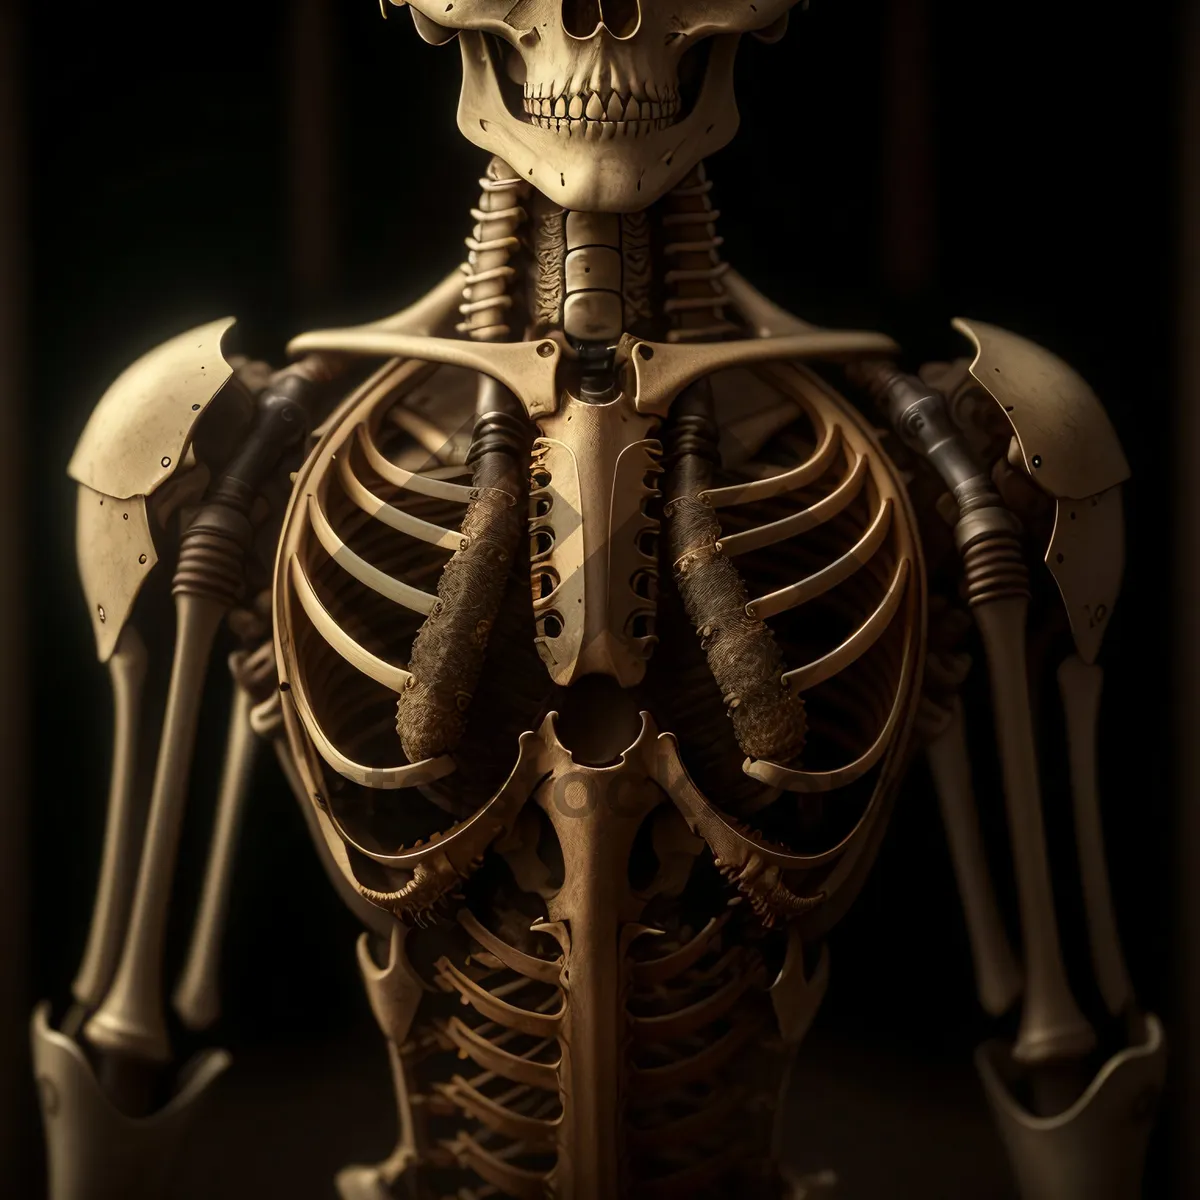 Picture of Anatomical Skeleton Sculpture - 3D X-ray Image